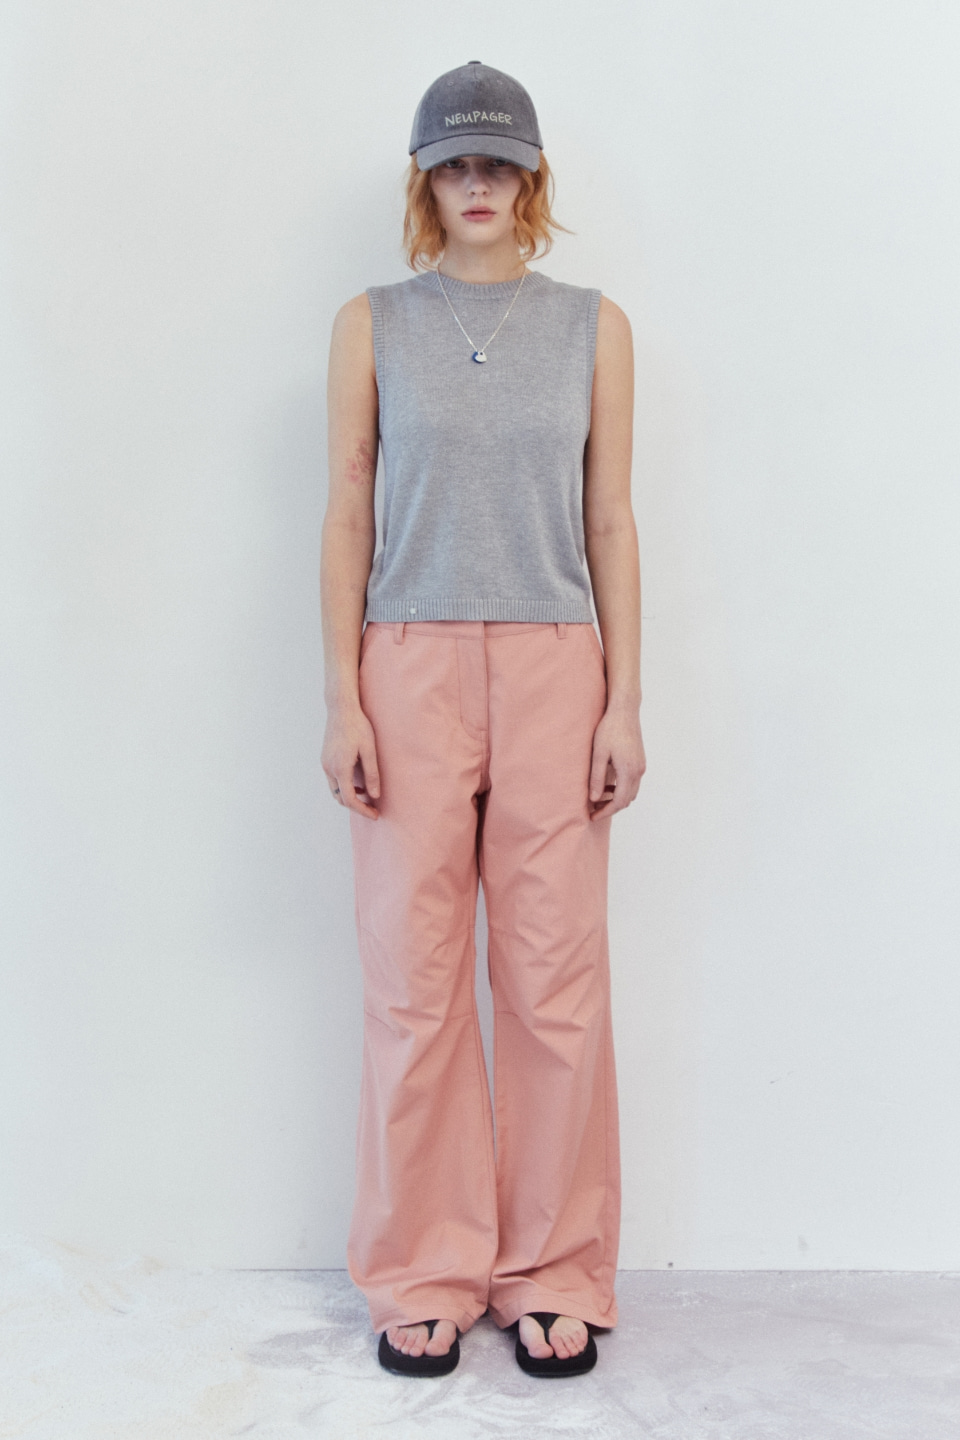 ripstop color pants - pink